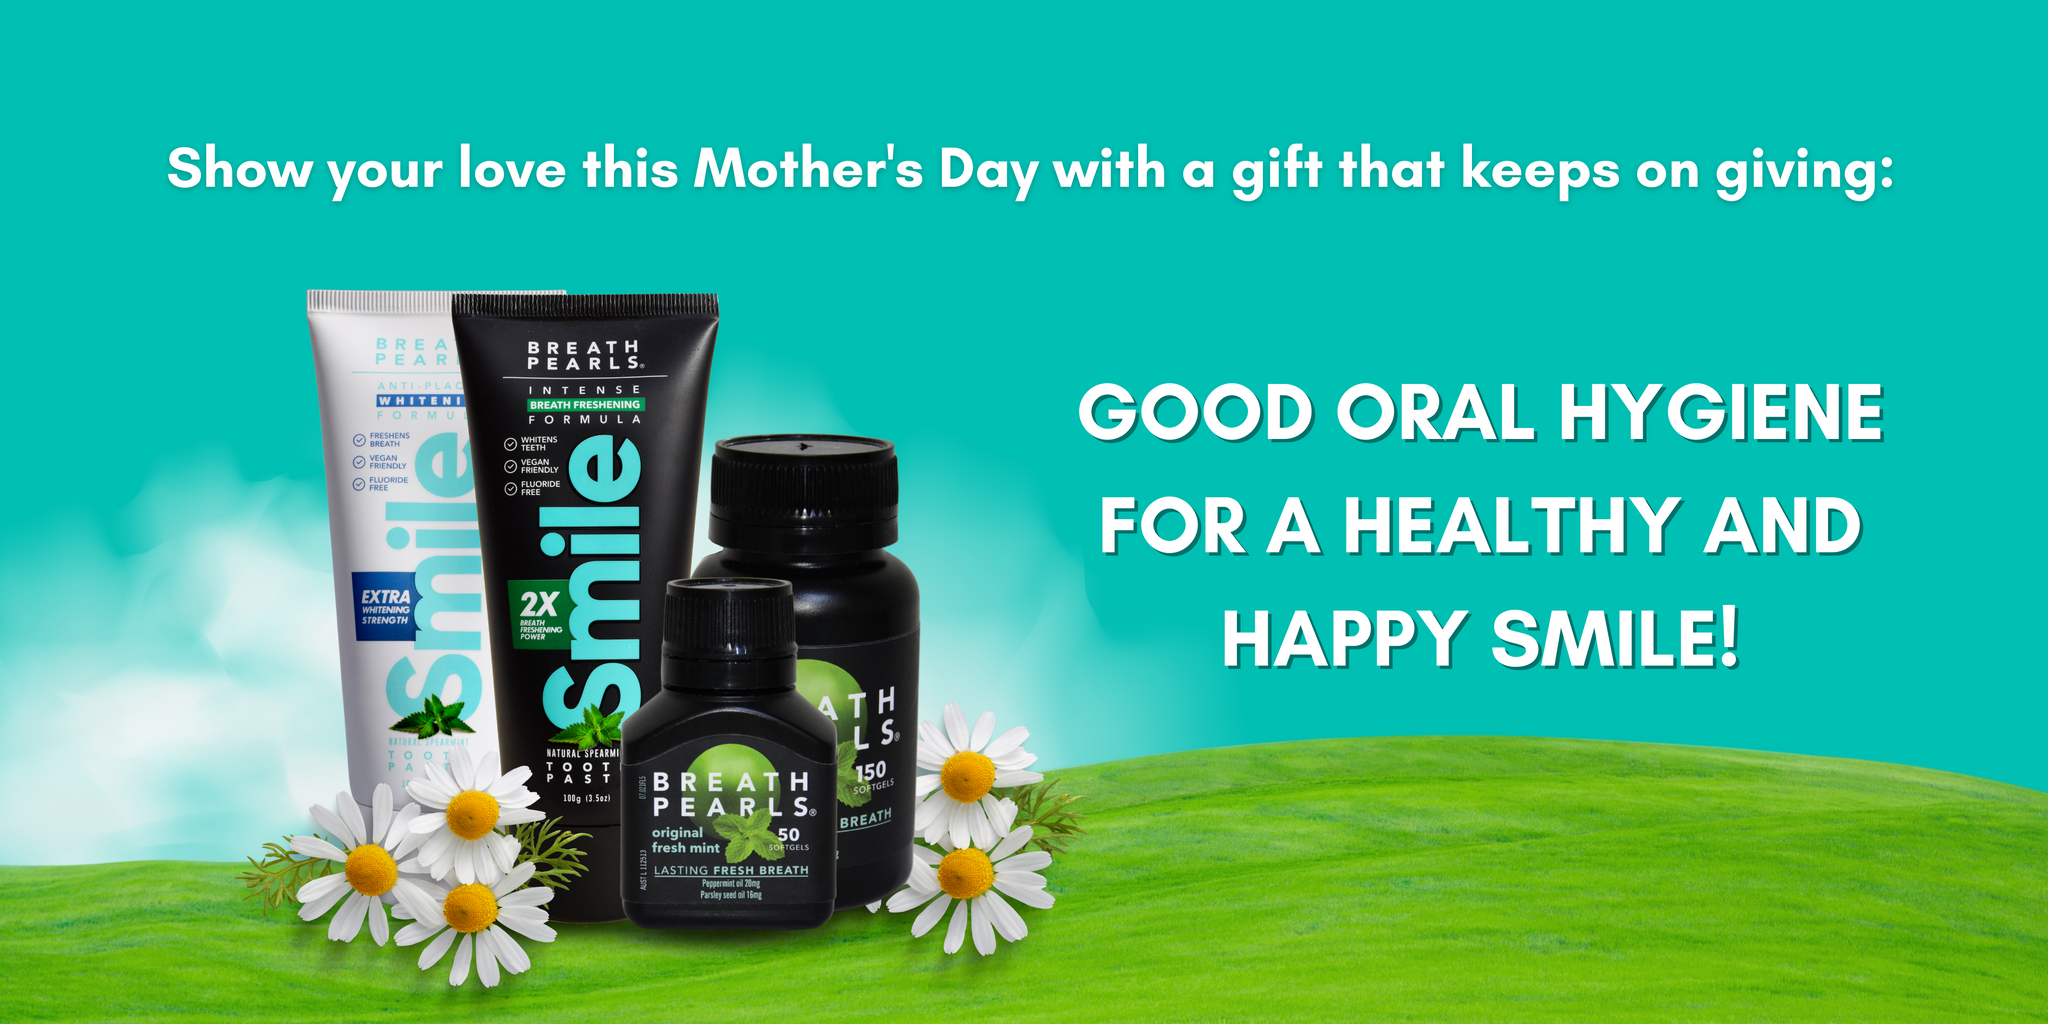 Show Your Love This Mother's Day With A Gift That Keeps On Giving: GOOD ORAL HYGIENE FOR A HEALTHY AND HAPPY SMILE!